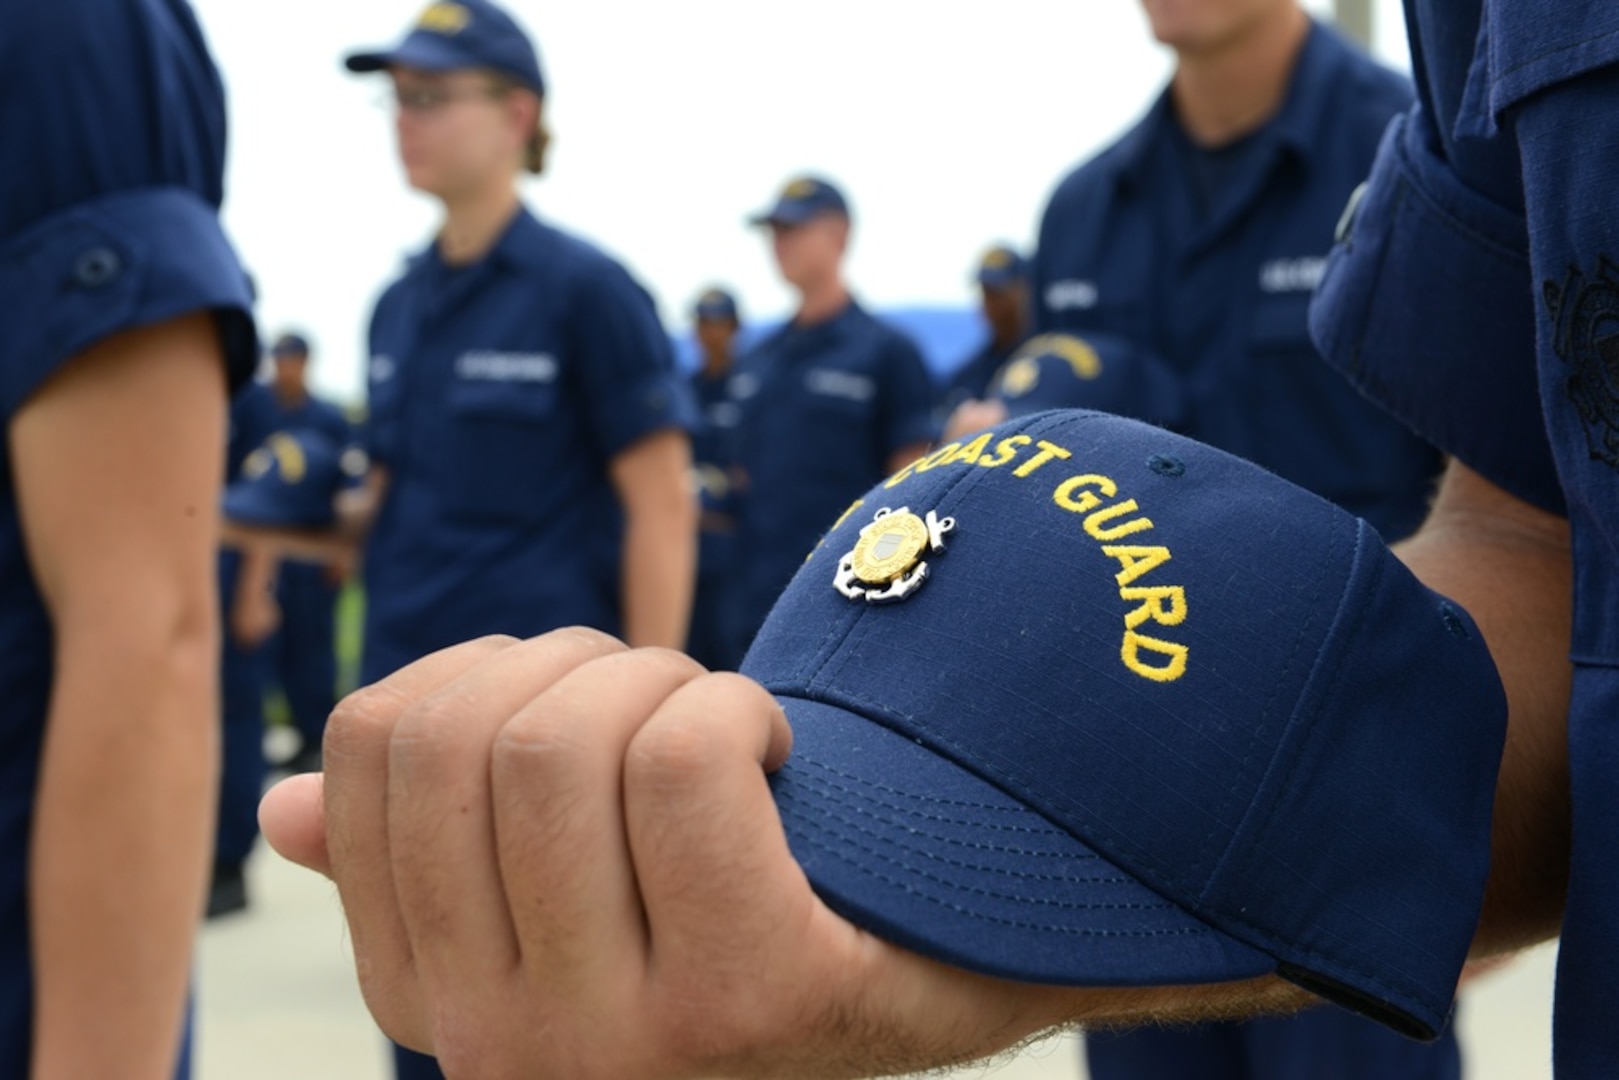 Company commanders present the senior recruit company with their Coast Guard Emblem at Coast Guard Training Center Cape May, N.J., July 29, 2013. The presentation of the Emblem signifies another step in the recruits' progress to earning the title "Coast Guardsman." (Coast Guard photo by Chief Warrant Officer Donnie Brzuska)